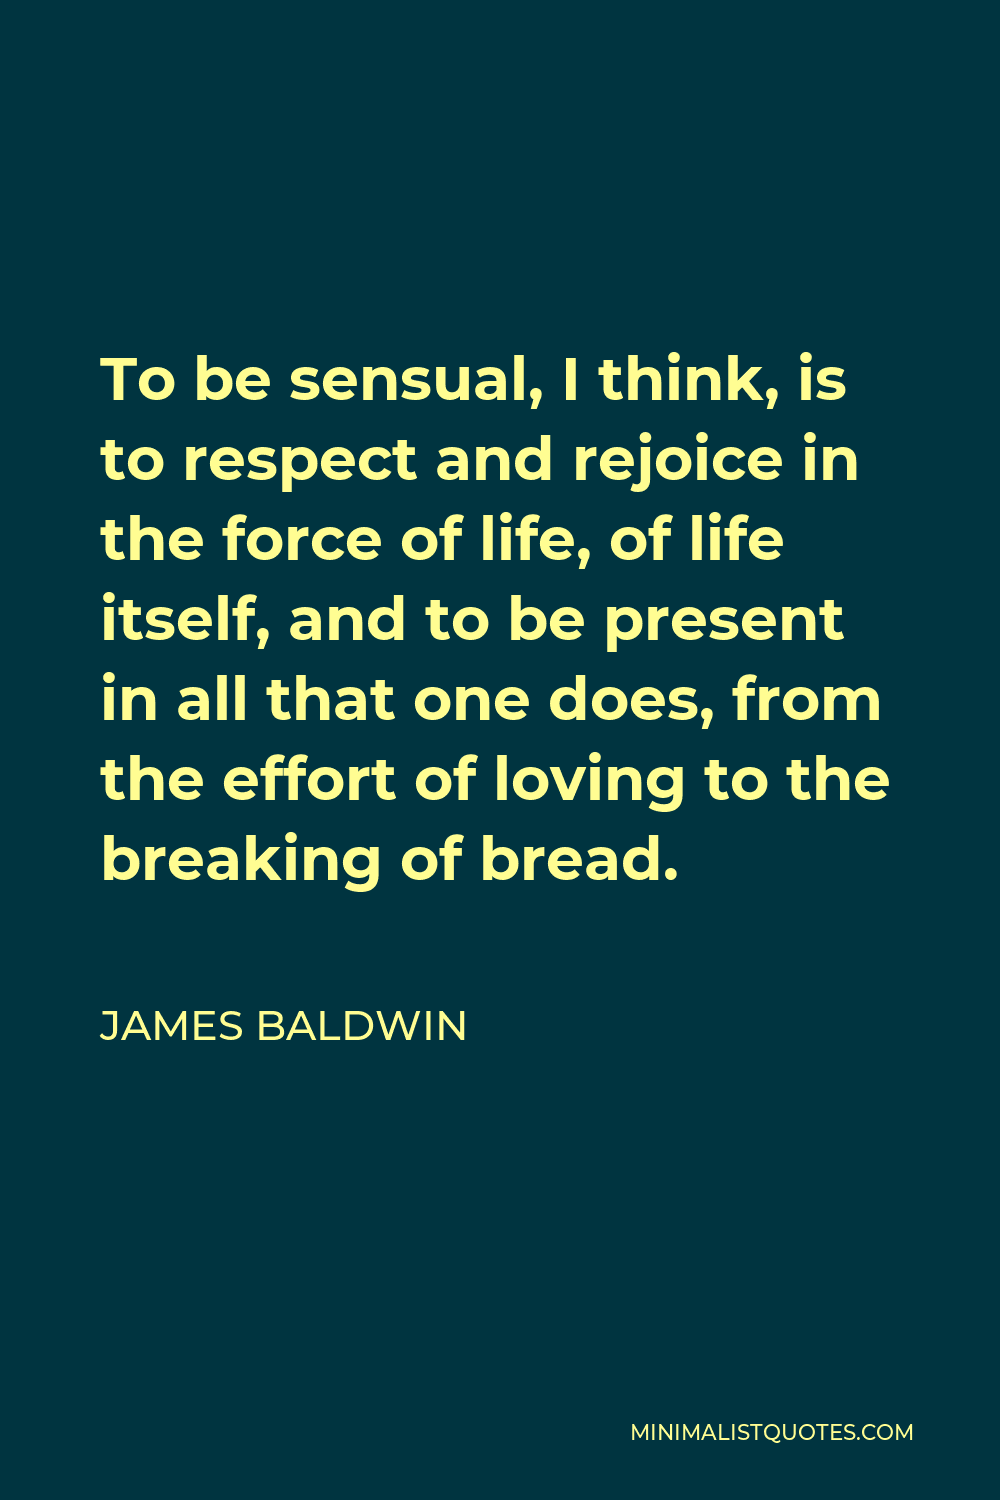 James Baldwin Quote - To be sensual, I think, is to respect and rejoice in the force of life, of life itself, and to be present in all that one does, from the effort of loving to the breaking of bread.